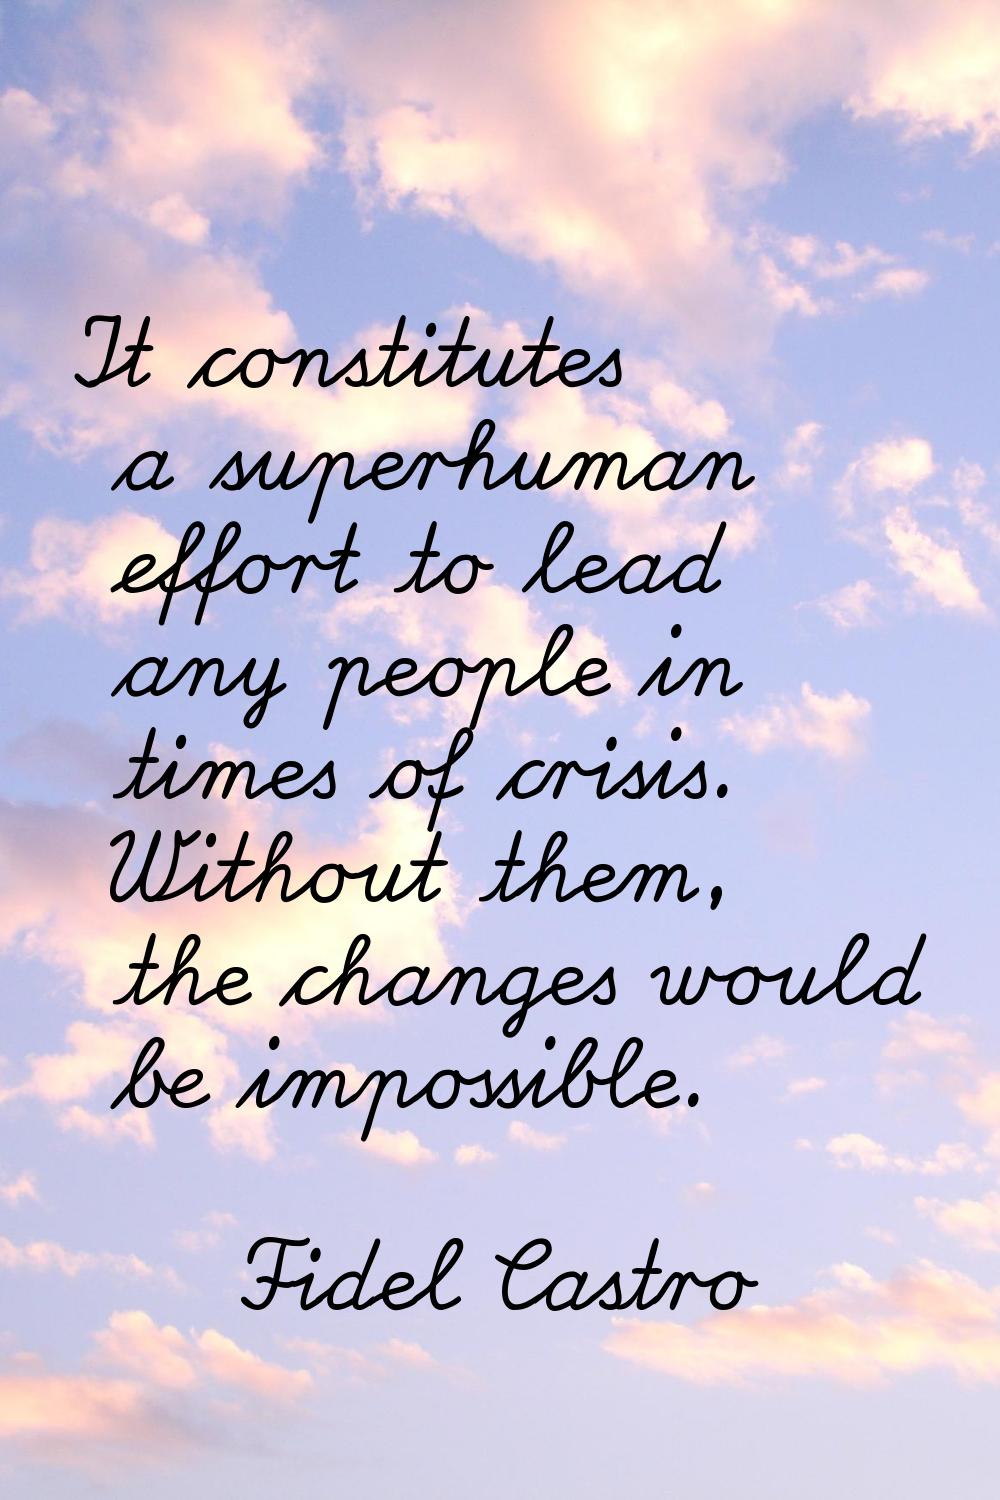 It constitutes a superhuman effort to lead any people in times of crisis. Without them, the changes